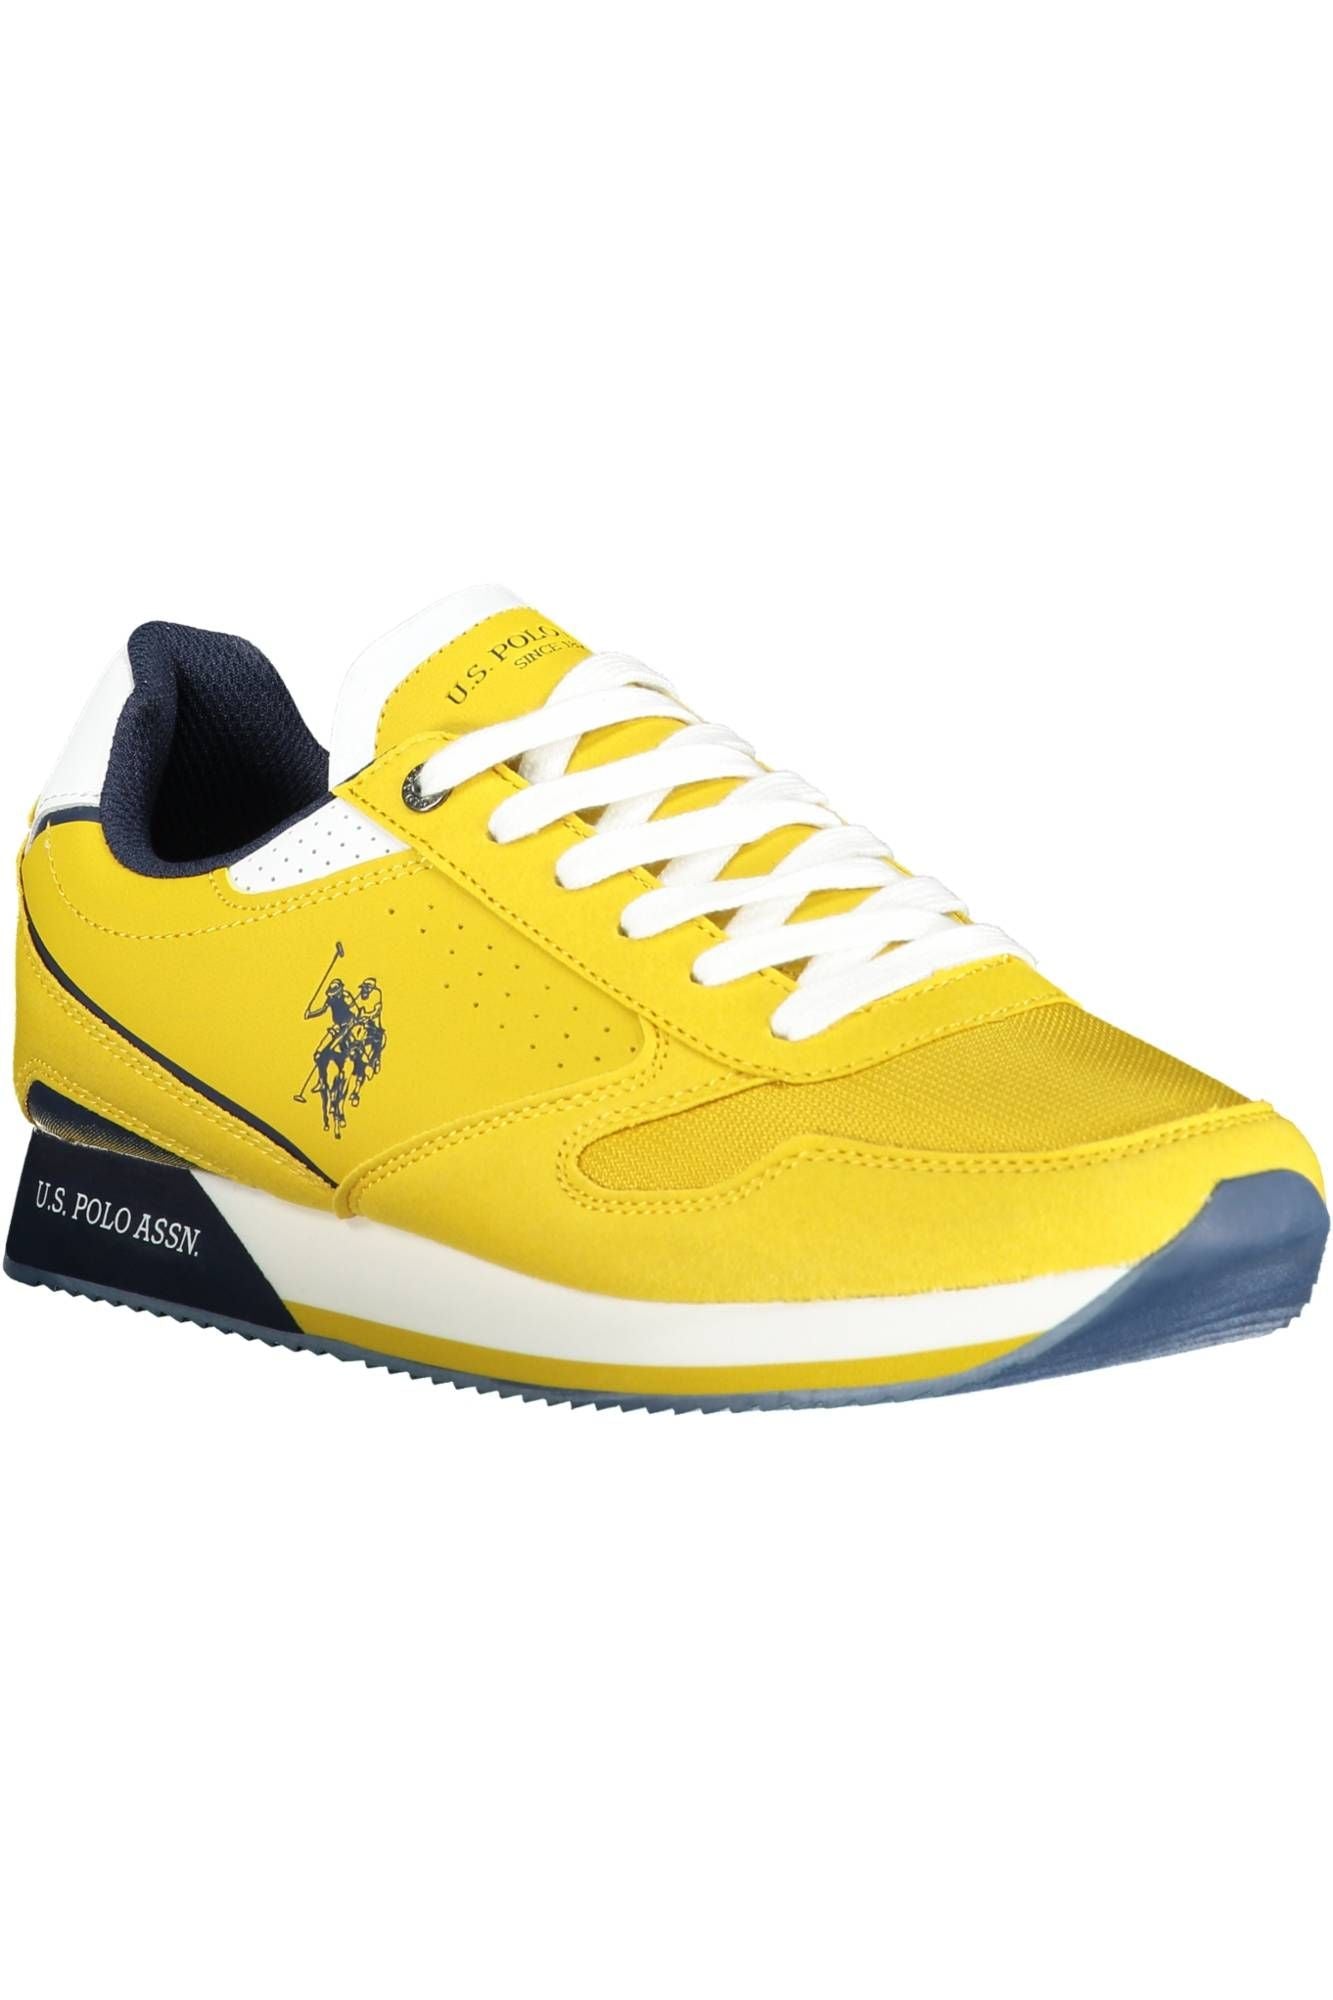 U.S. POLO ASSN. Bold Yellow Laced Sports Sneaker